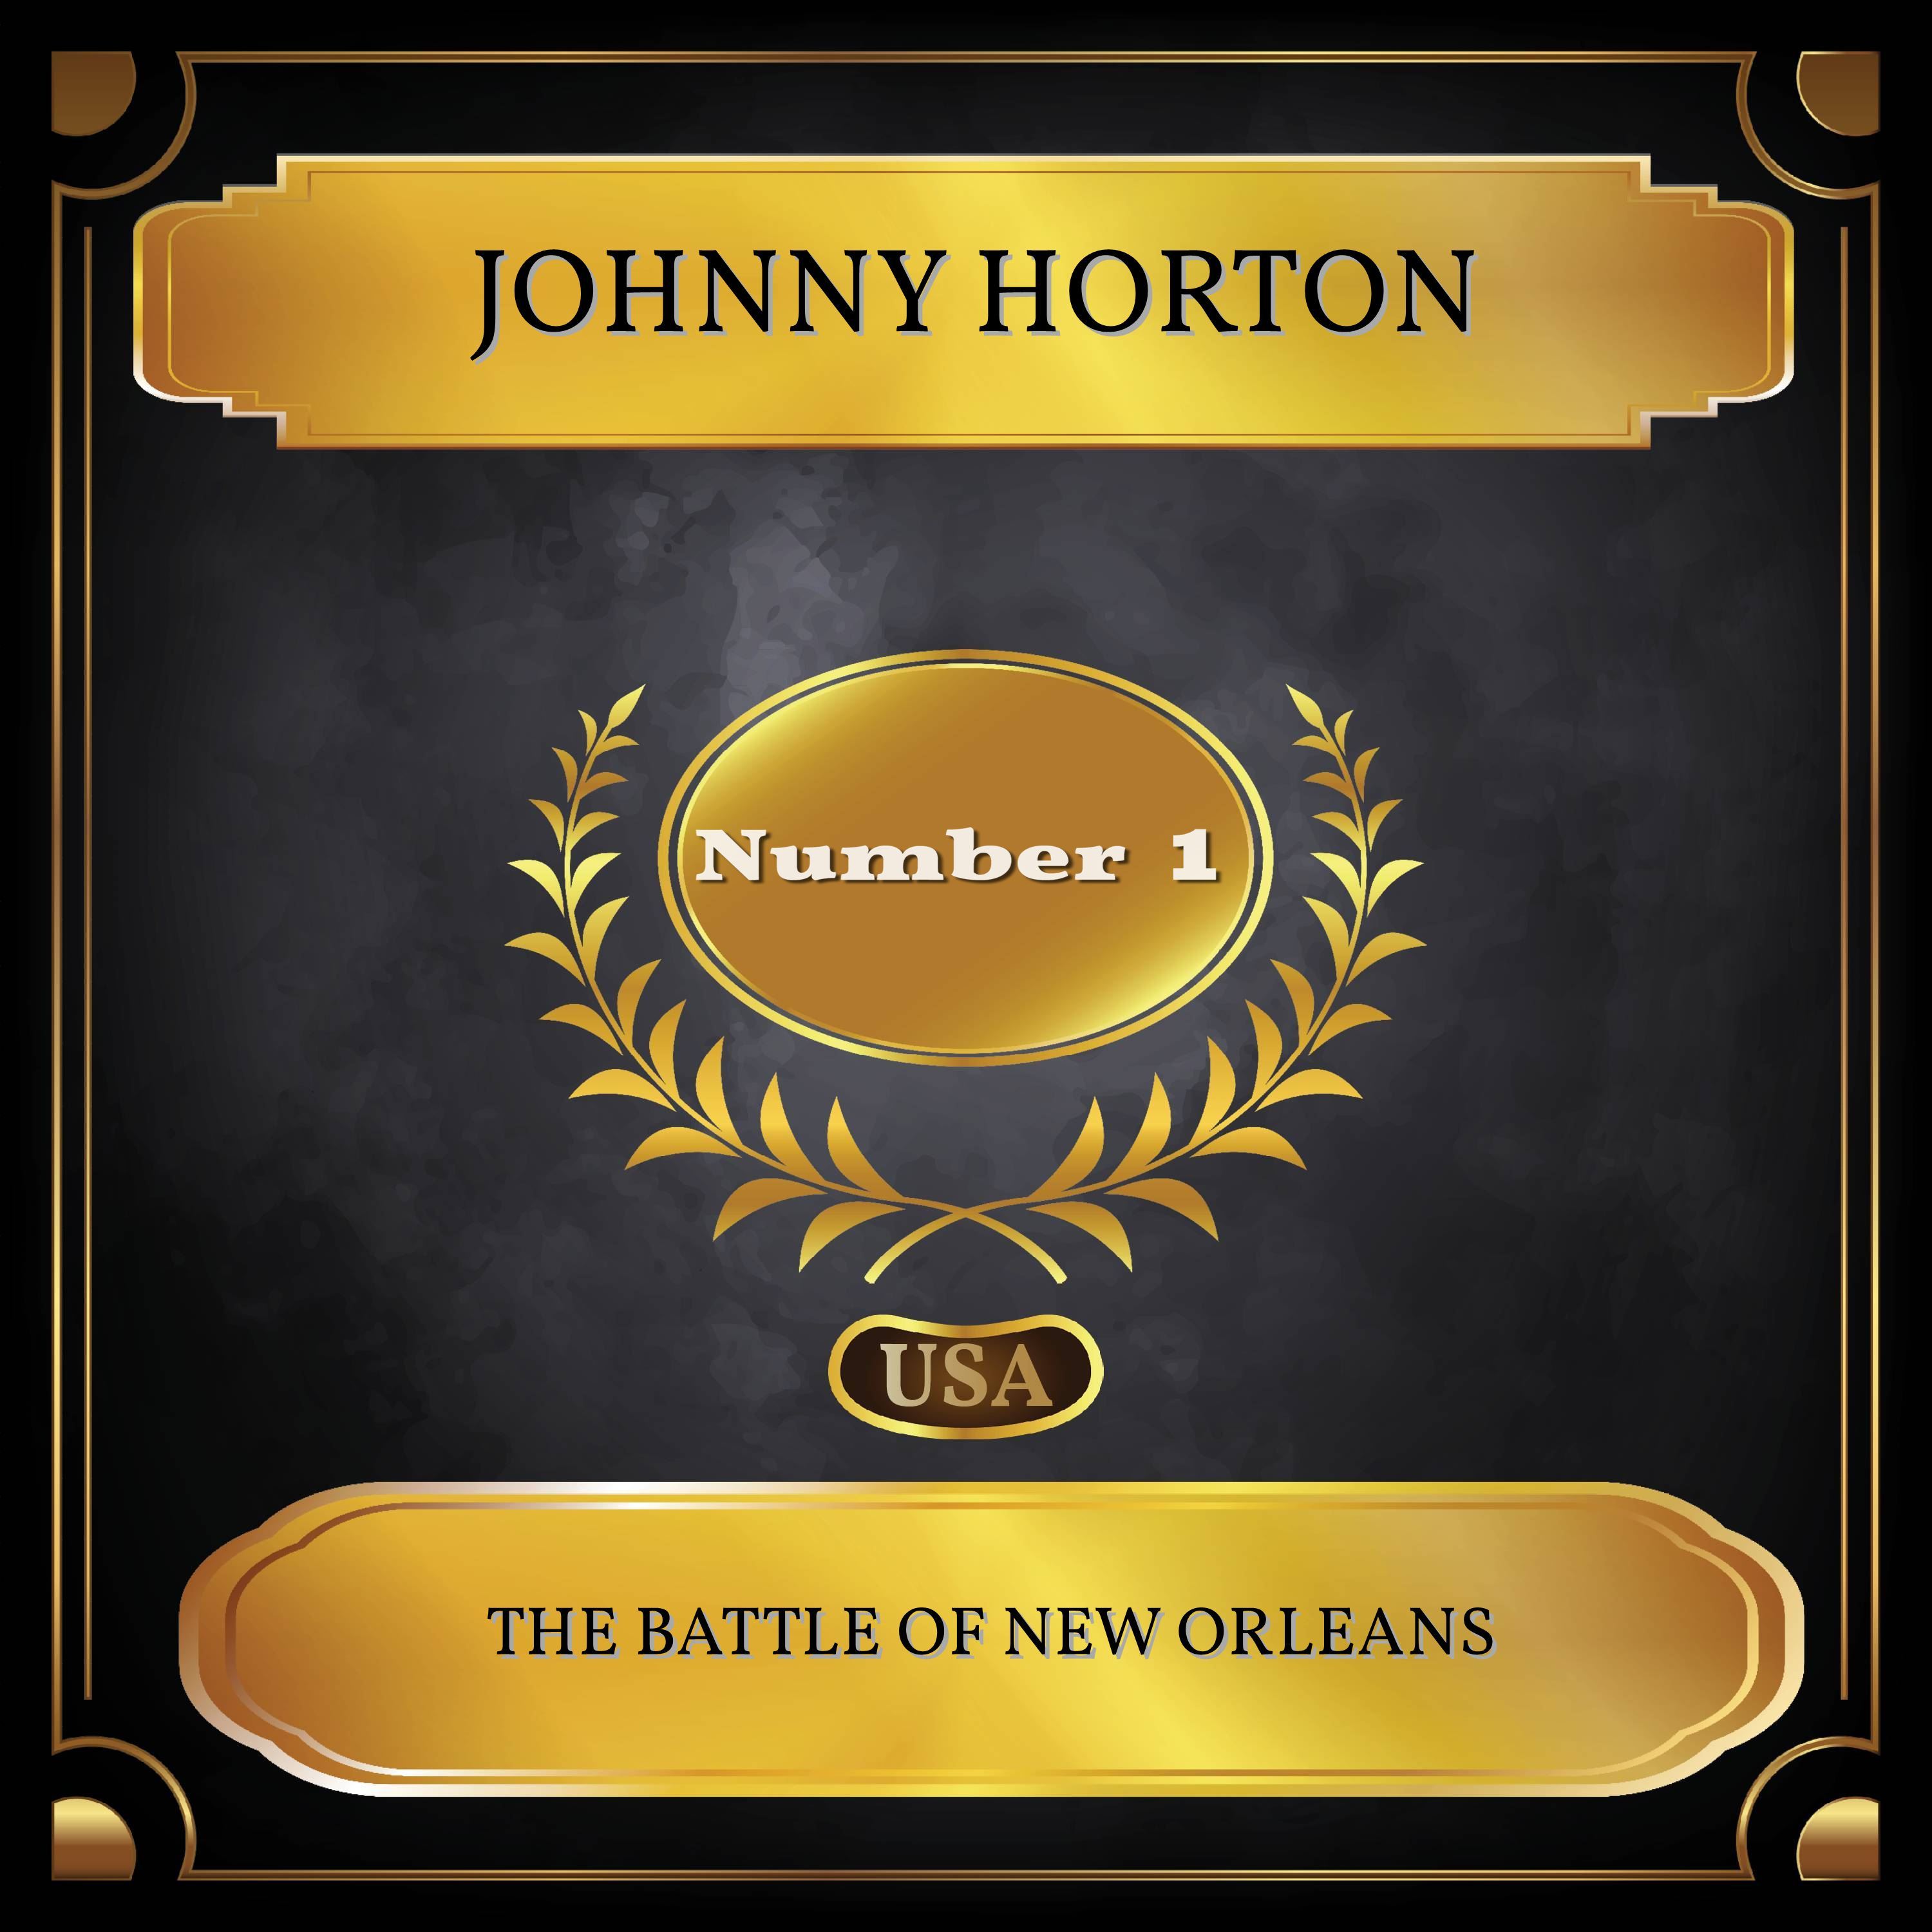 The Battle Of New Orleans (Billboard Hot 100 - No. 01)